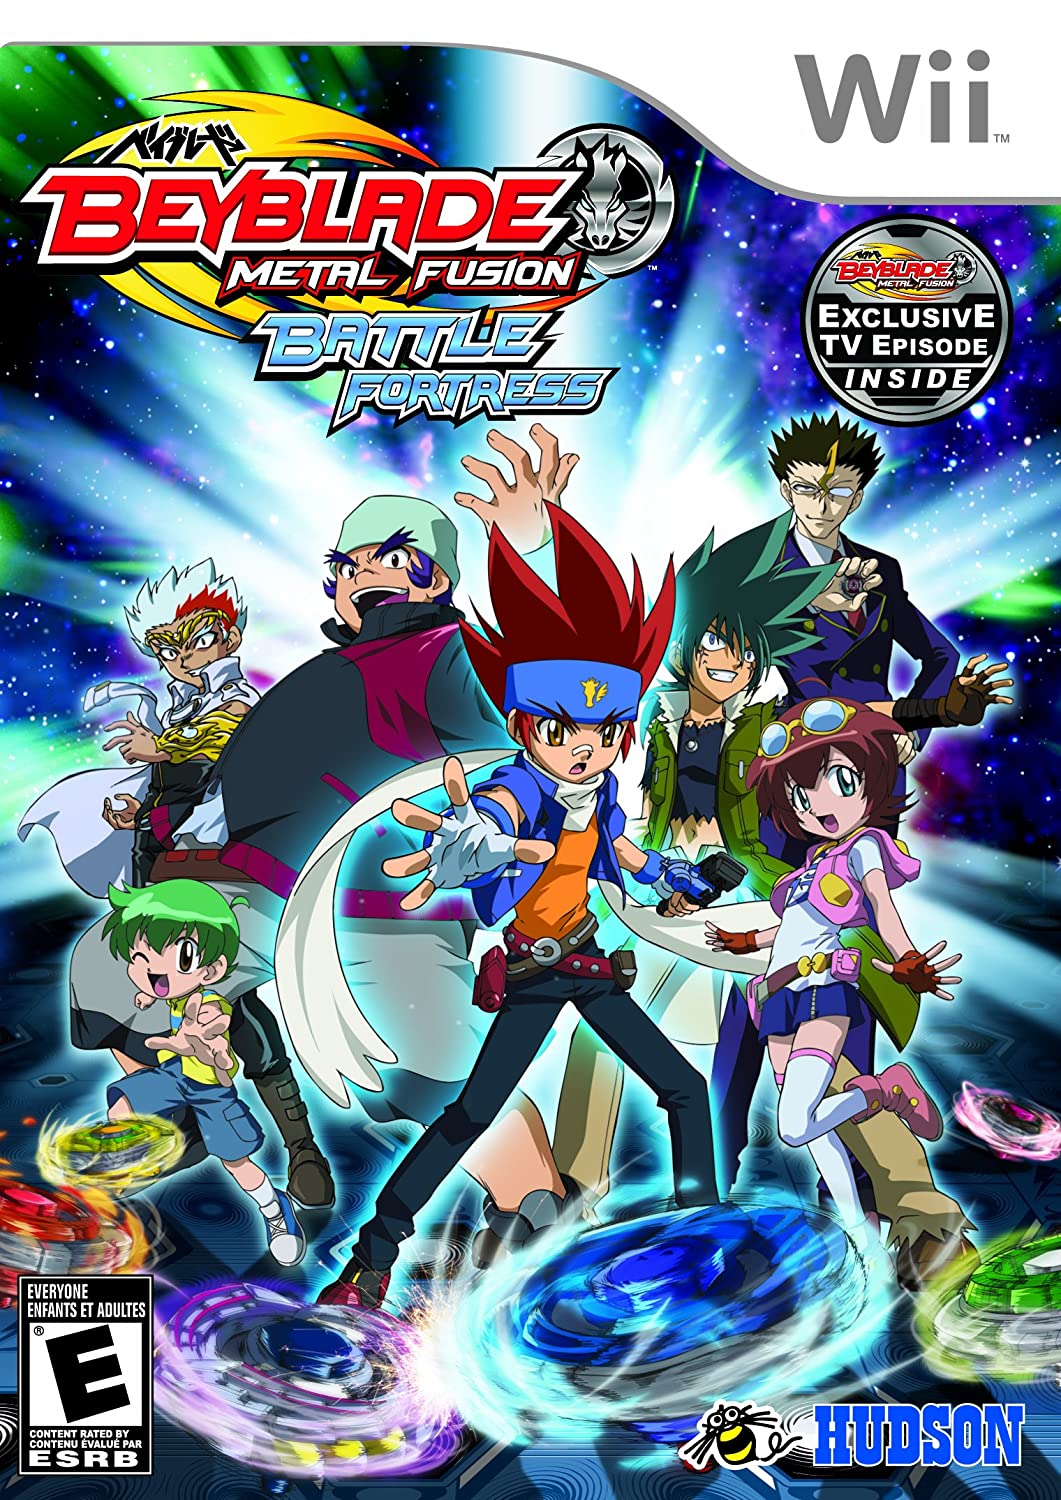 Beyblade: Metal Fusion – Battle Fortress player count stats